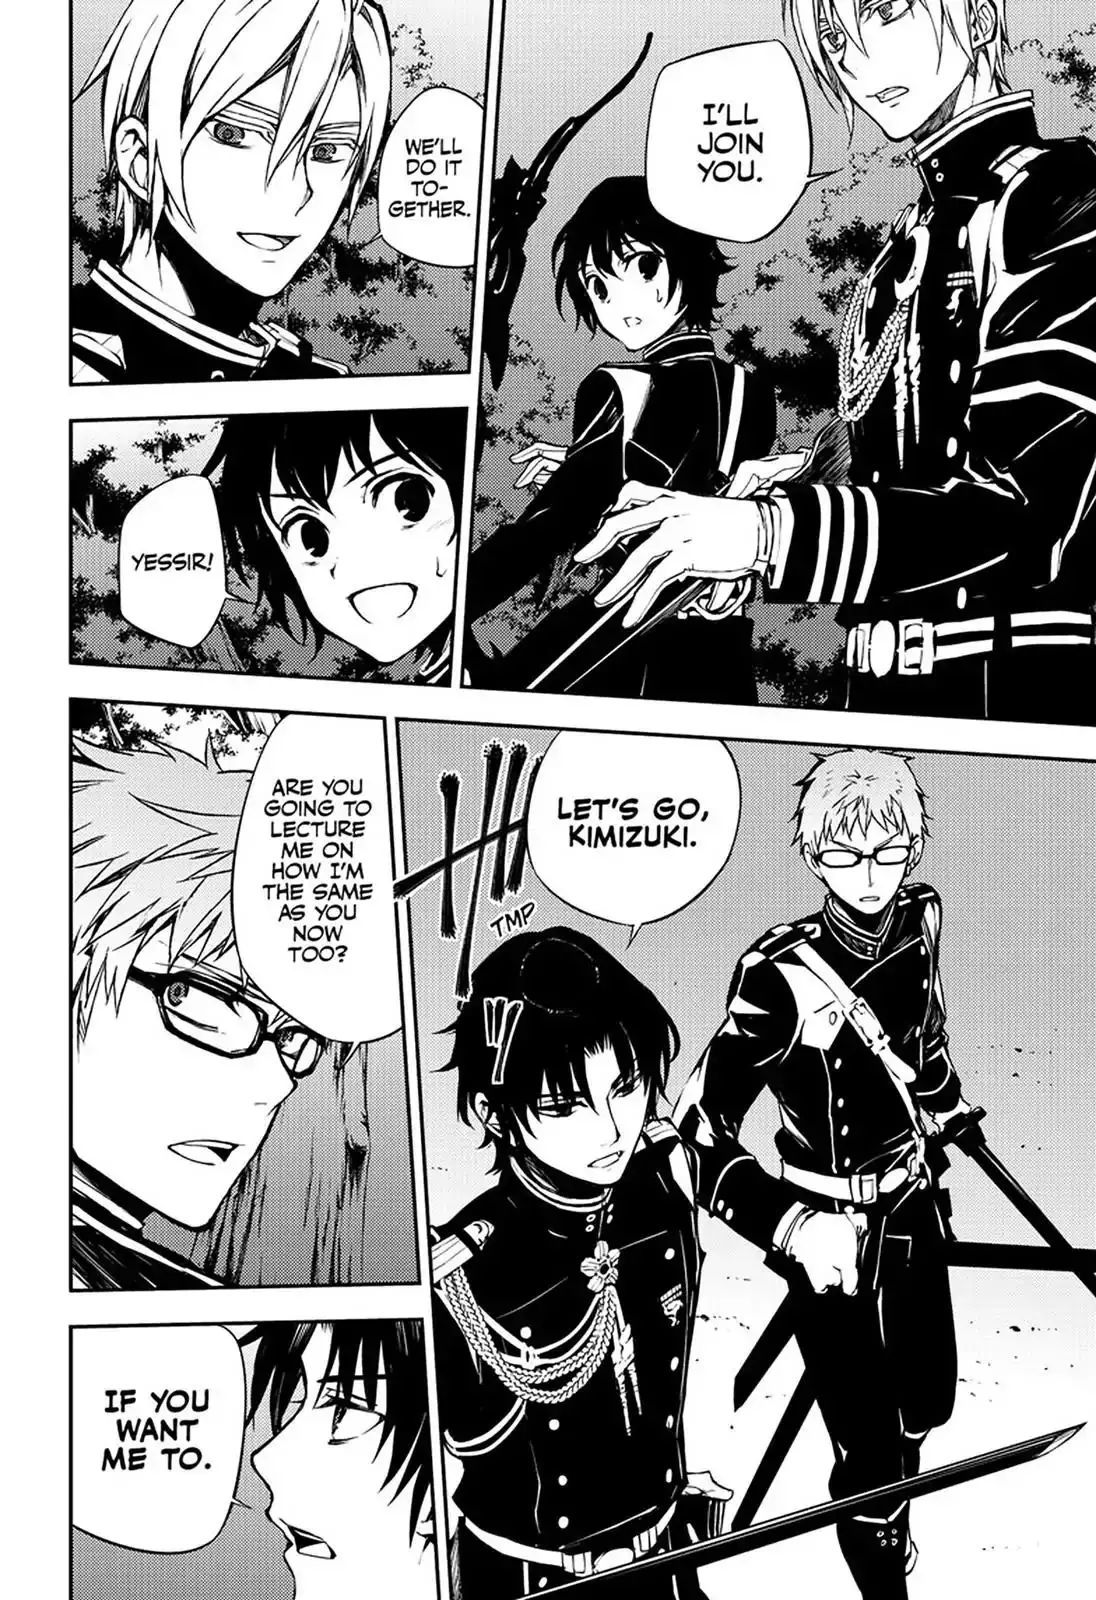 Seraph Of The End - 66 page 4-02098adf